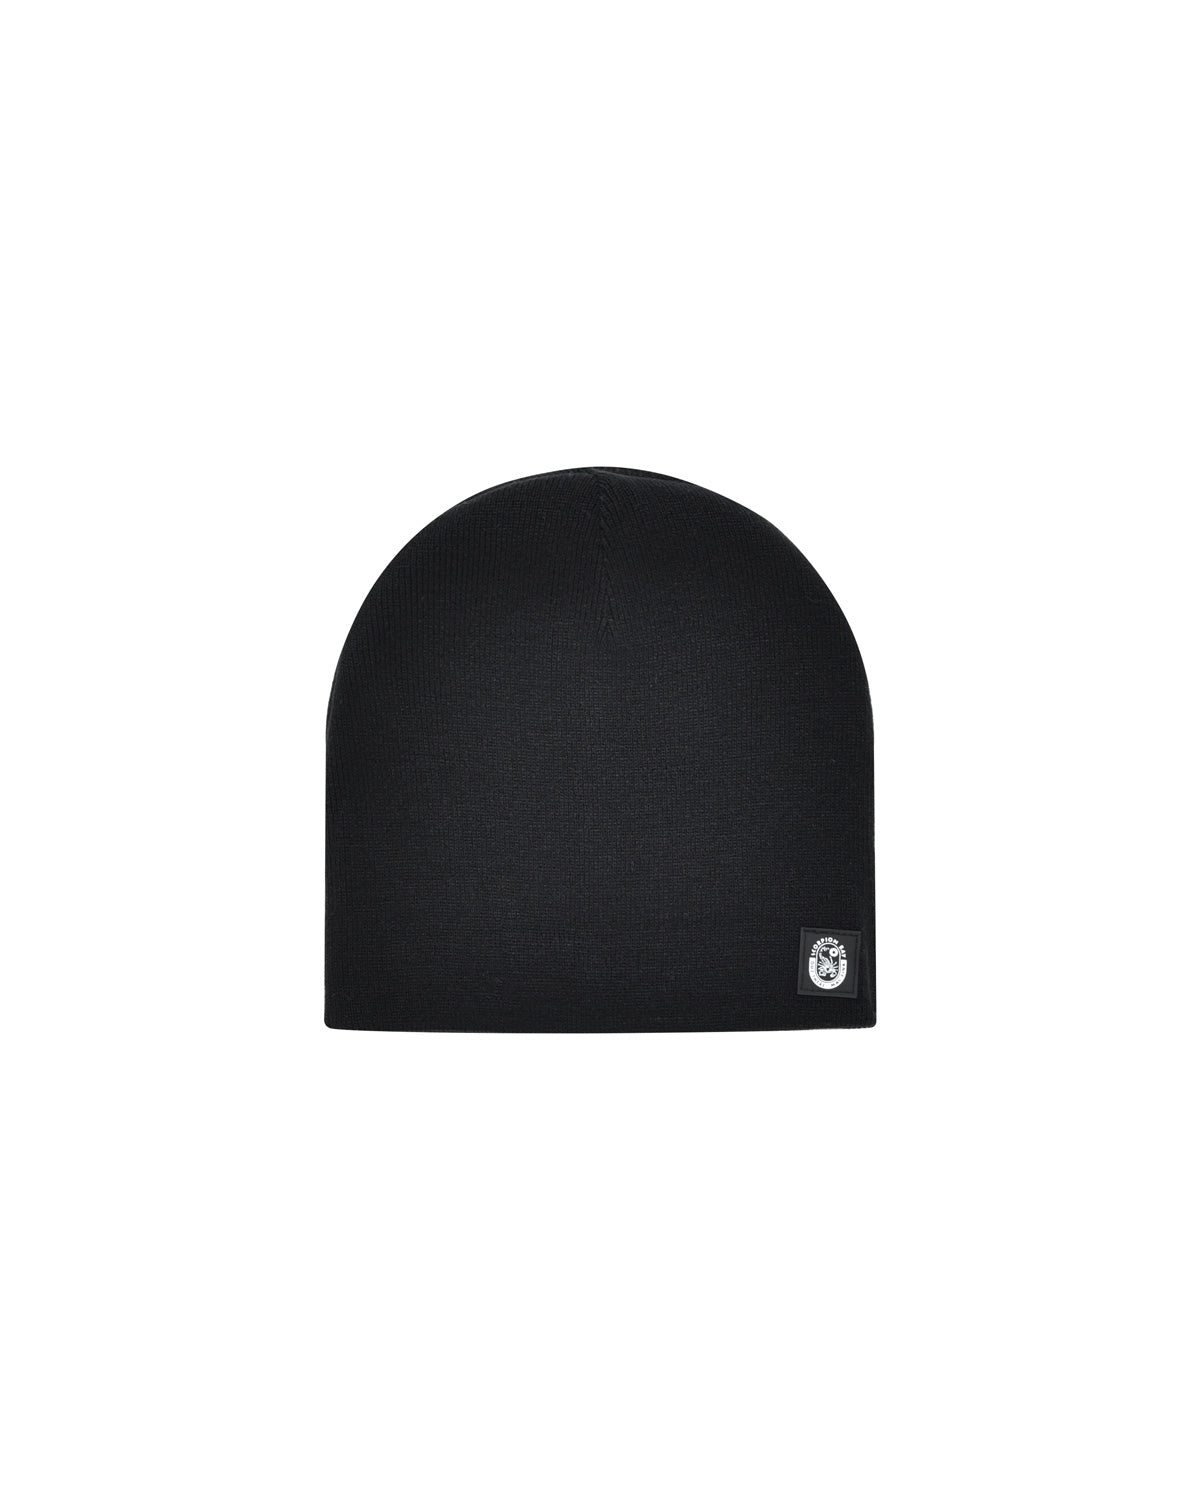 Doubleface Ritual Black Knitted Beanie